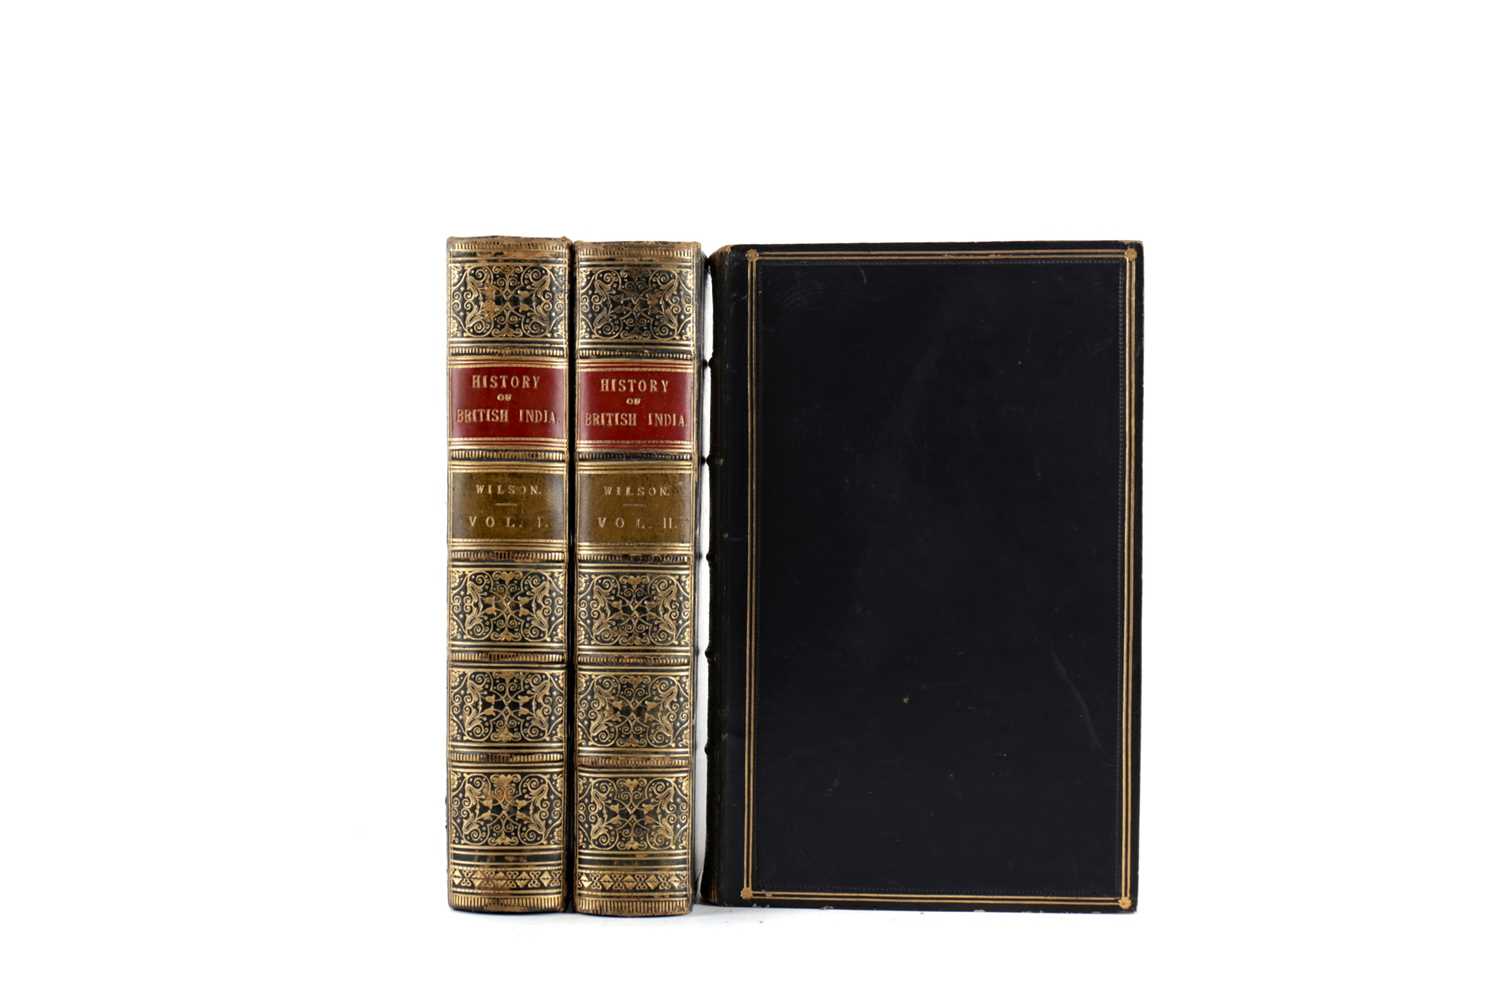 Lot 1114 - THREE VOLUMES OF THE HISTORY OF BRITISH INDIA BY H. H. WILSON